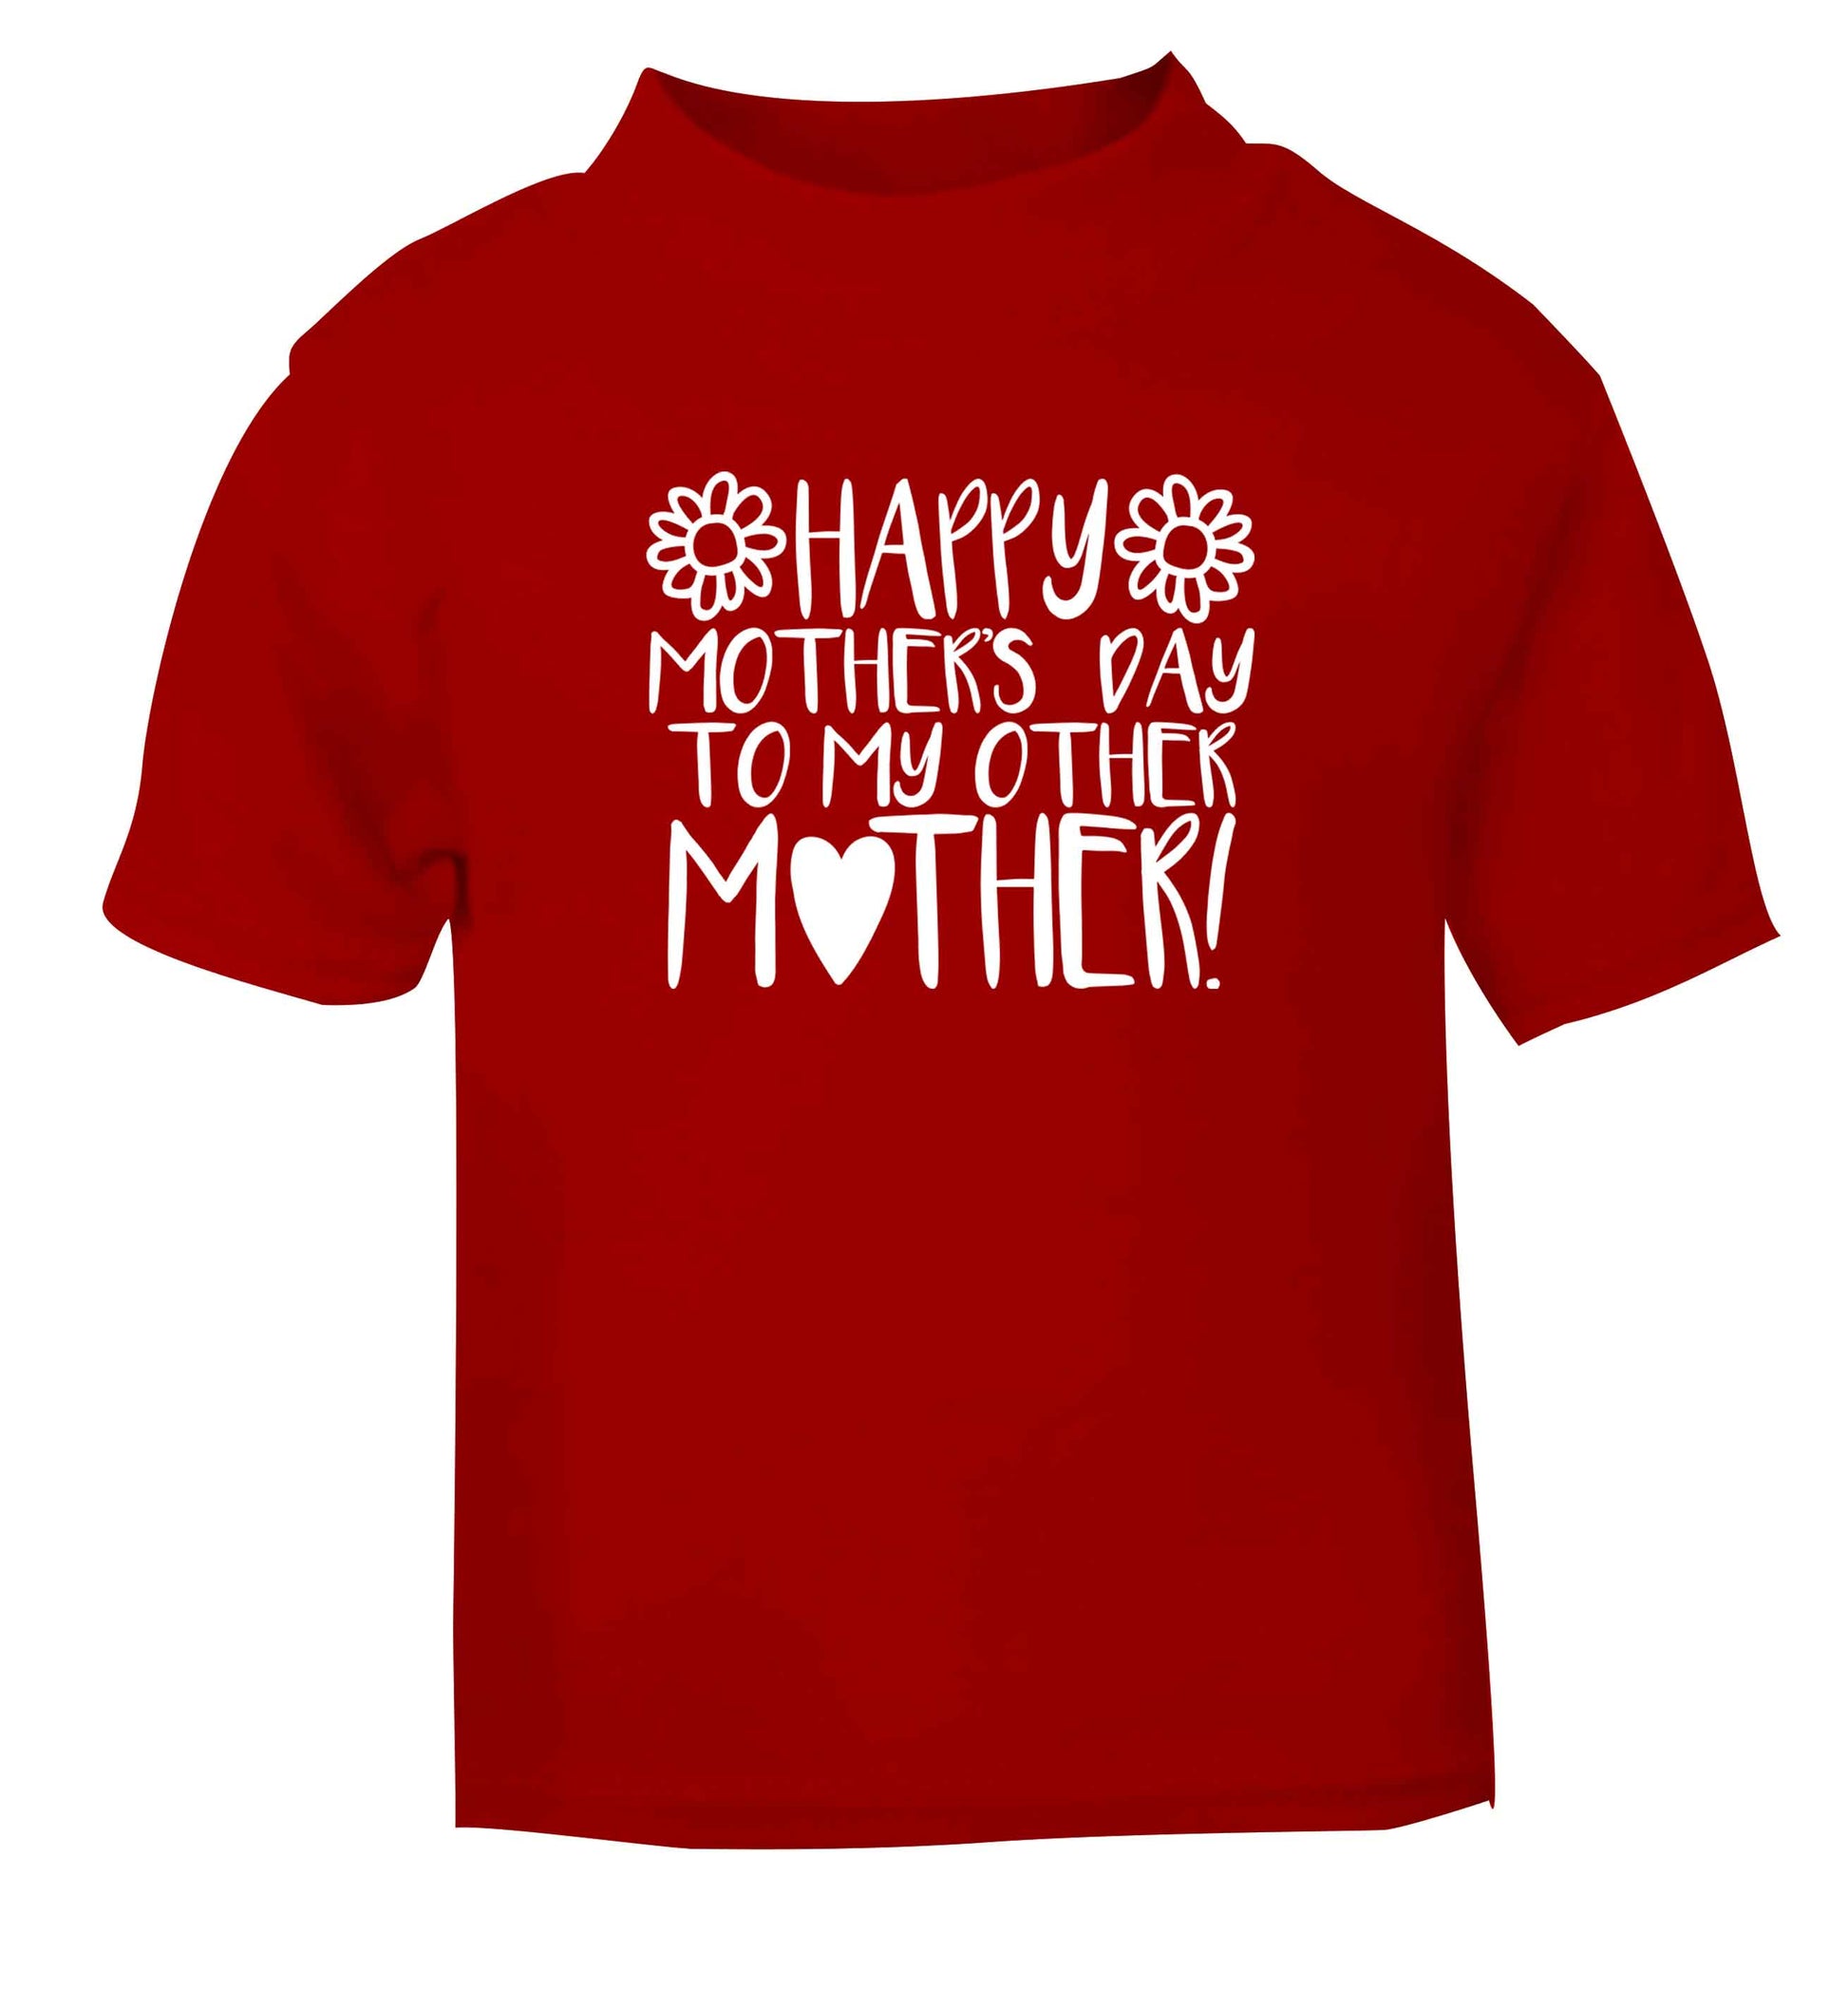 Happy mother's day to my other mother red baby toddler Tshirt 2 Years